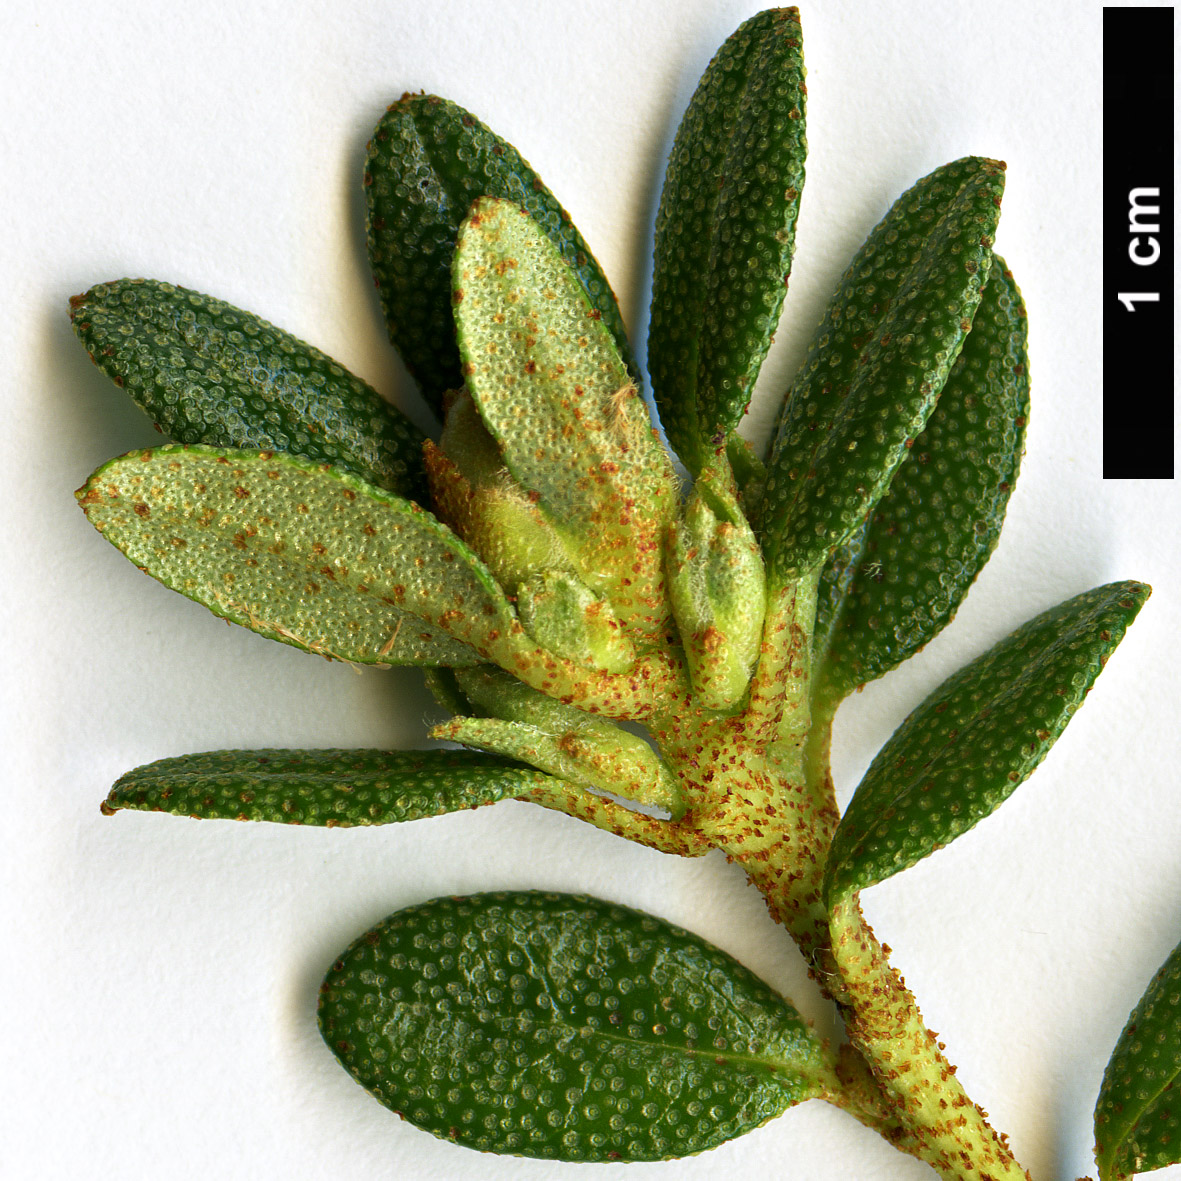 High resolution image: Family: Ericaceae - Genus: Rhododendron - Taxon: tapetiforme